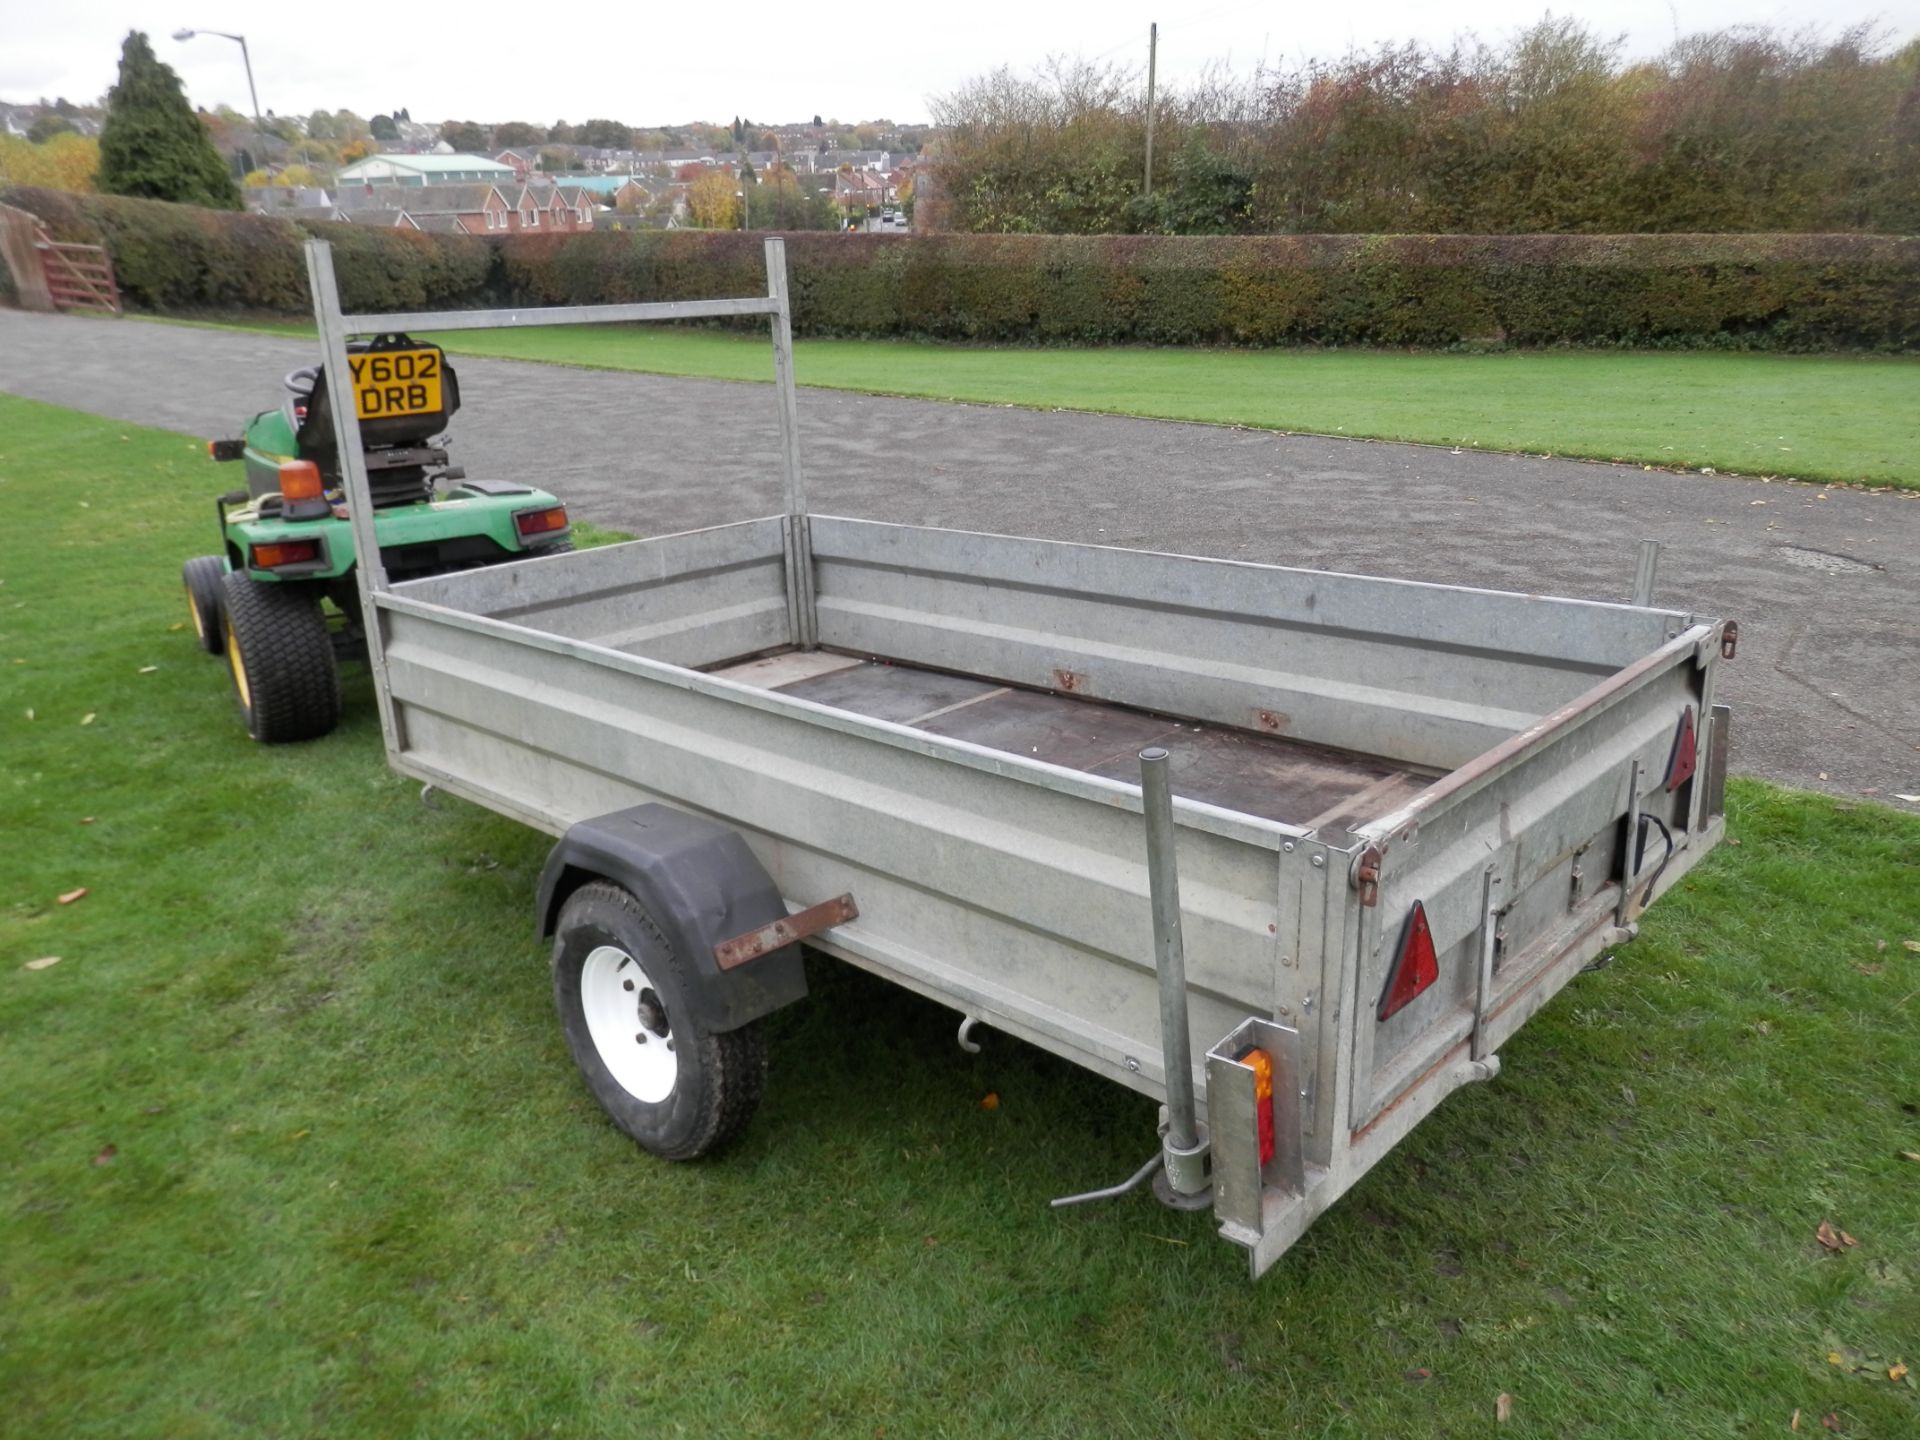 GOOD SOLID 8 X 4' GALVANIZED TRAILER, 1.5 TONNE. DROP REAR FOR EASY LOADING. - Image 6 of 9